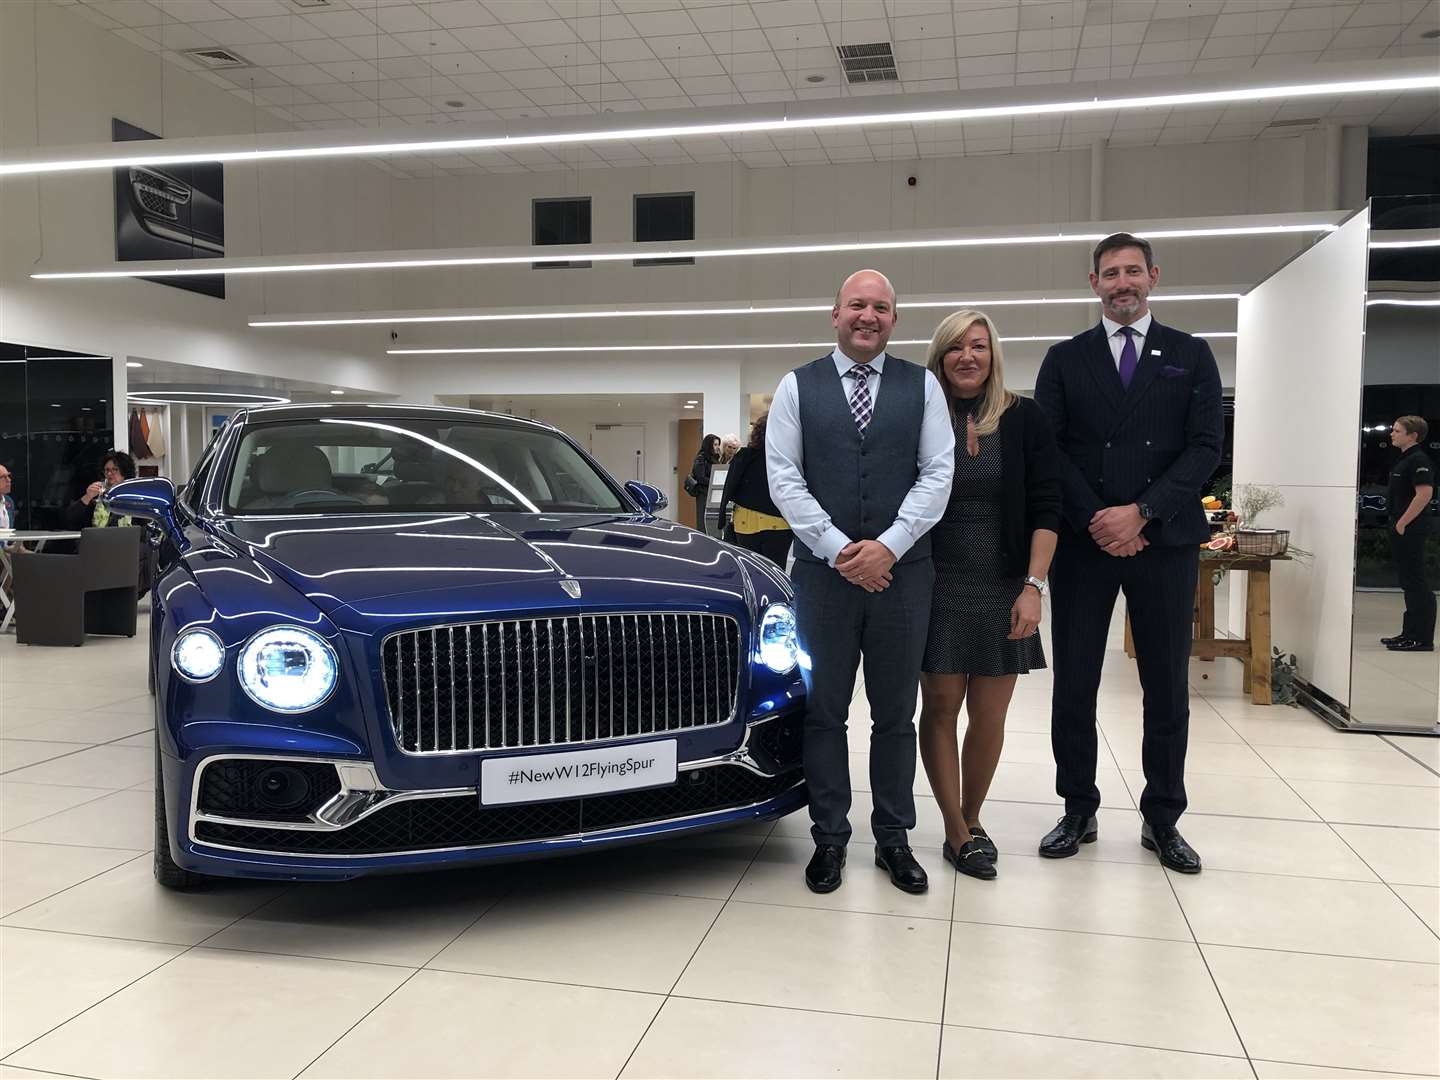 Bentley's Flying Spur made a visit to a Tunbridge Wells showroom ahead of its launch